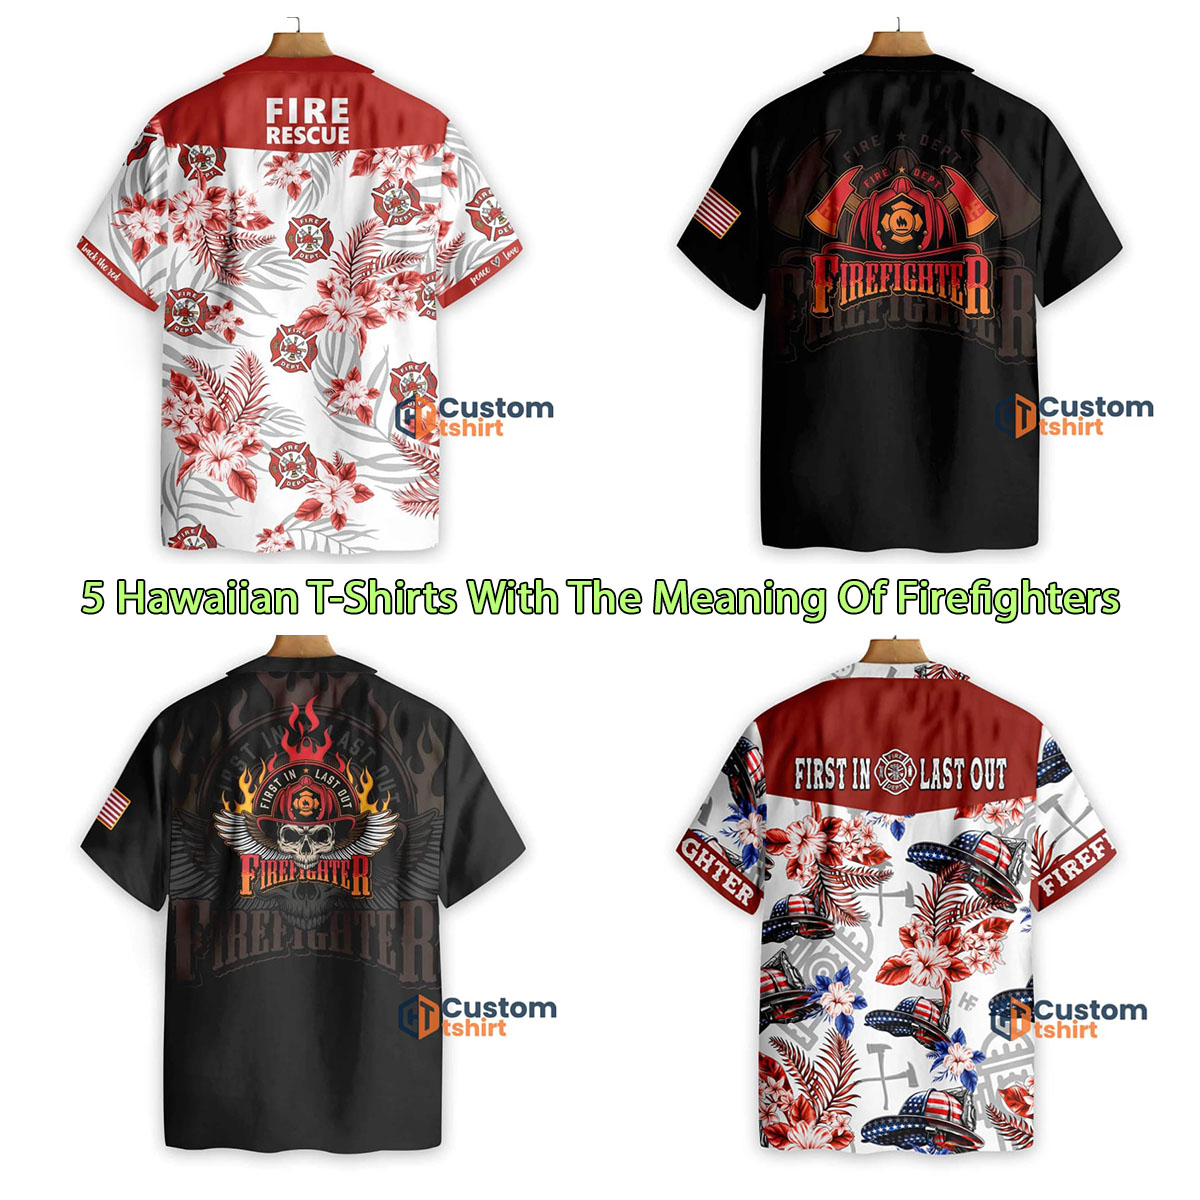 5 Hawaiian T-Shirts With The Meaning Of Firefighters